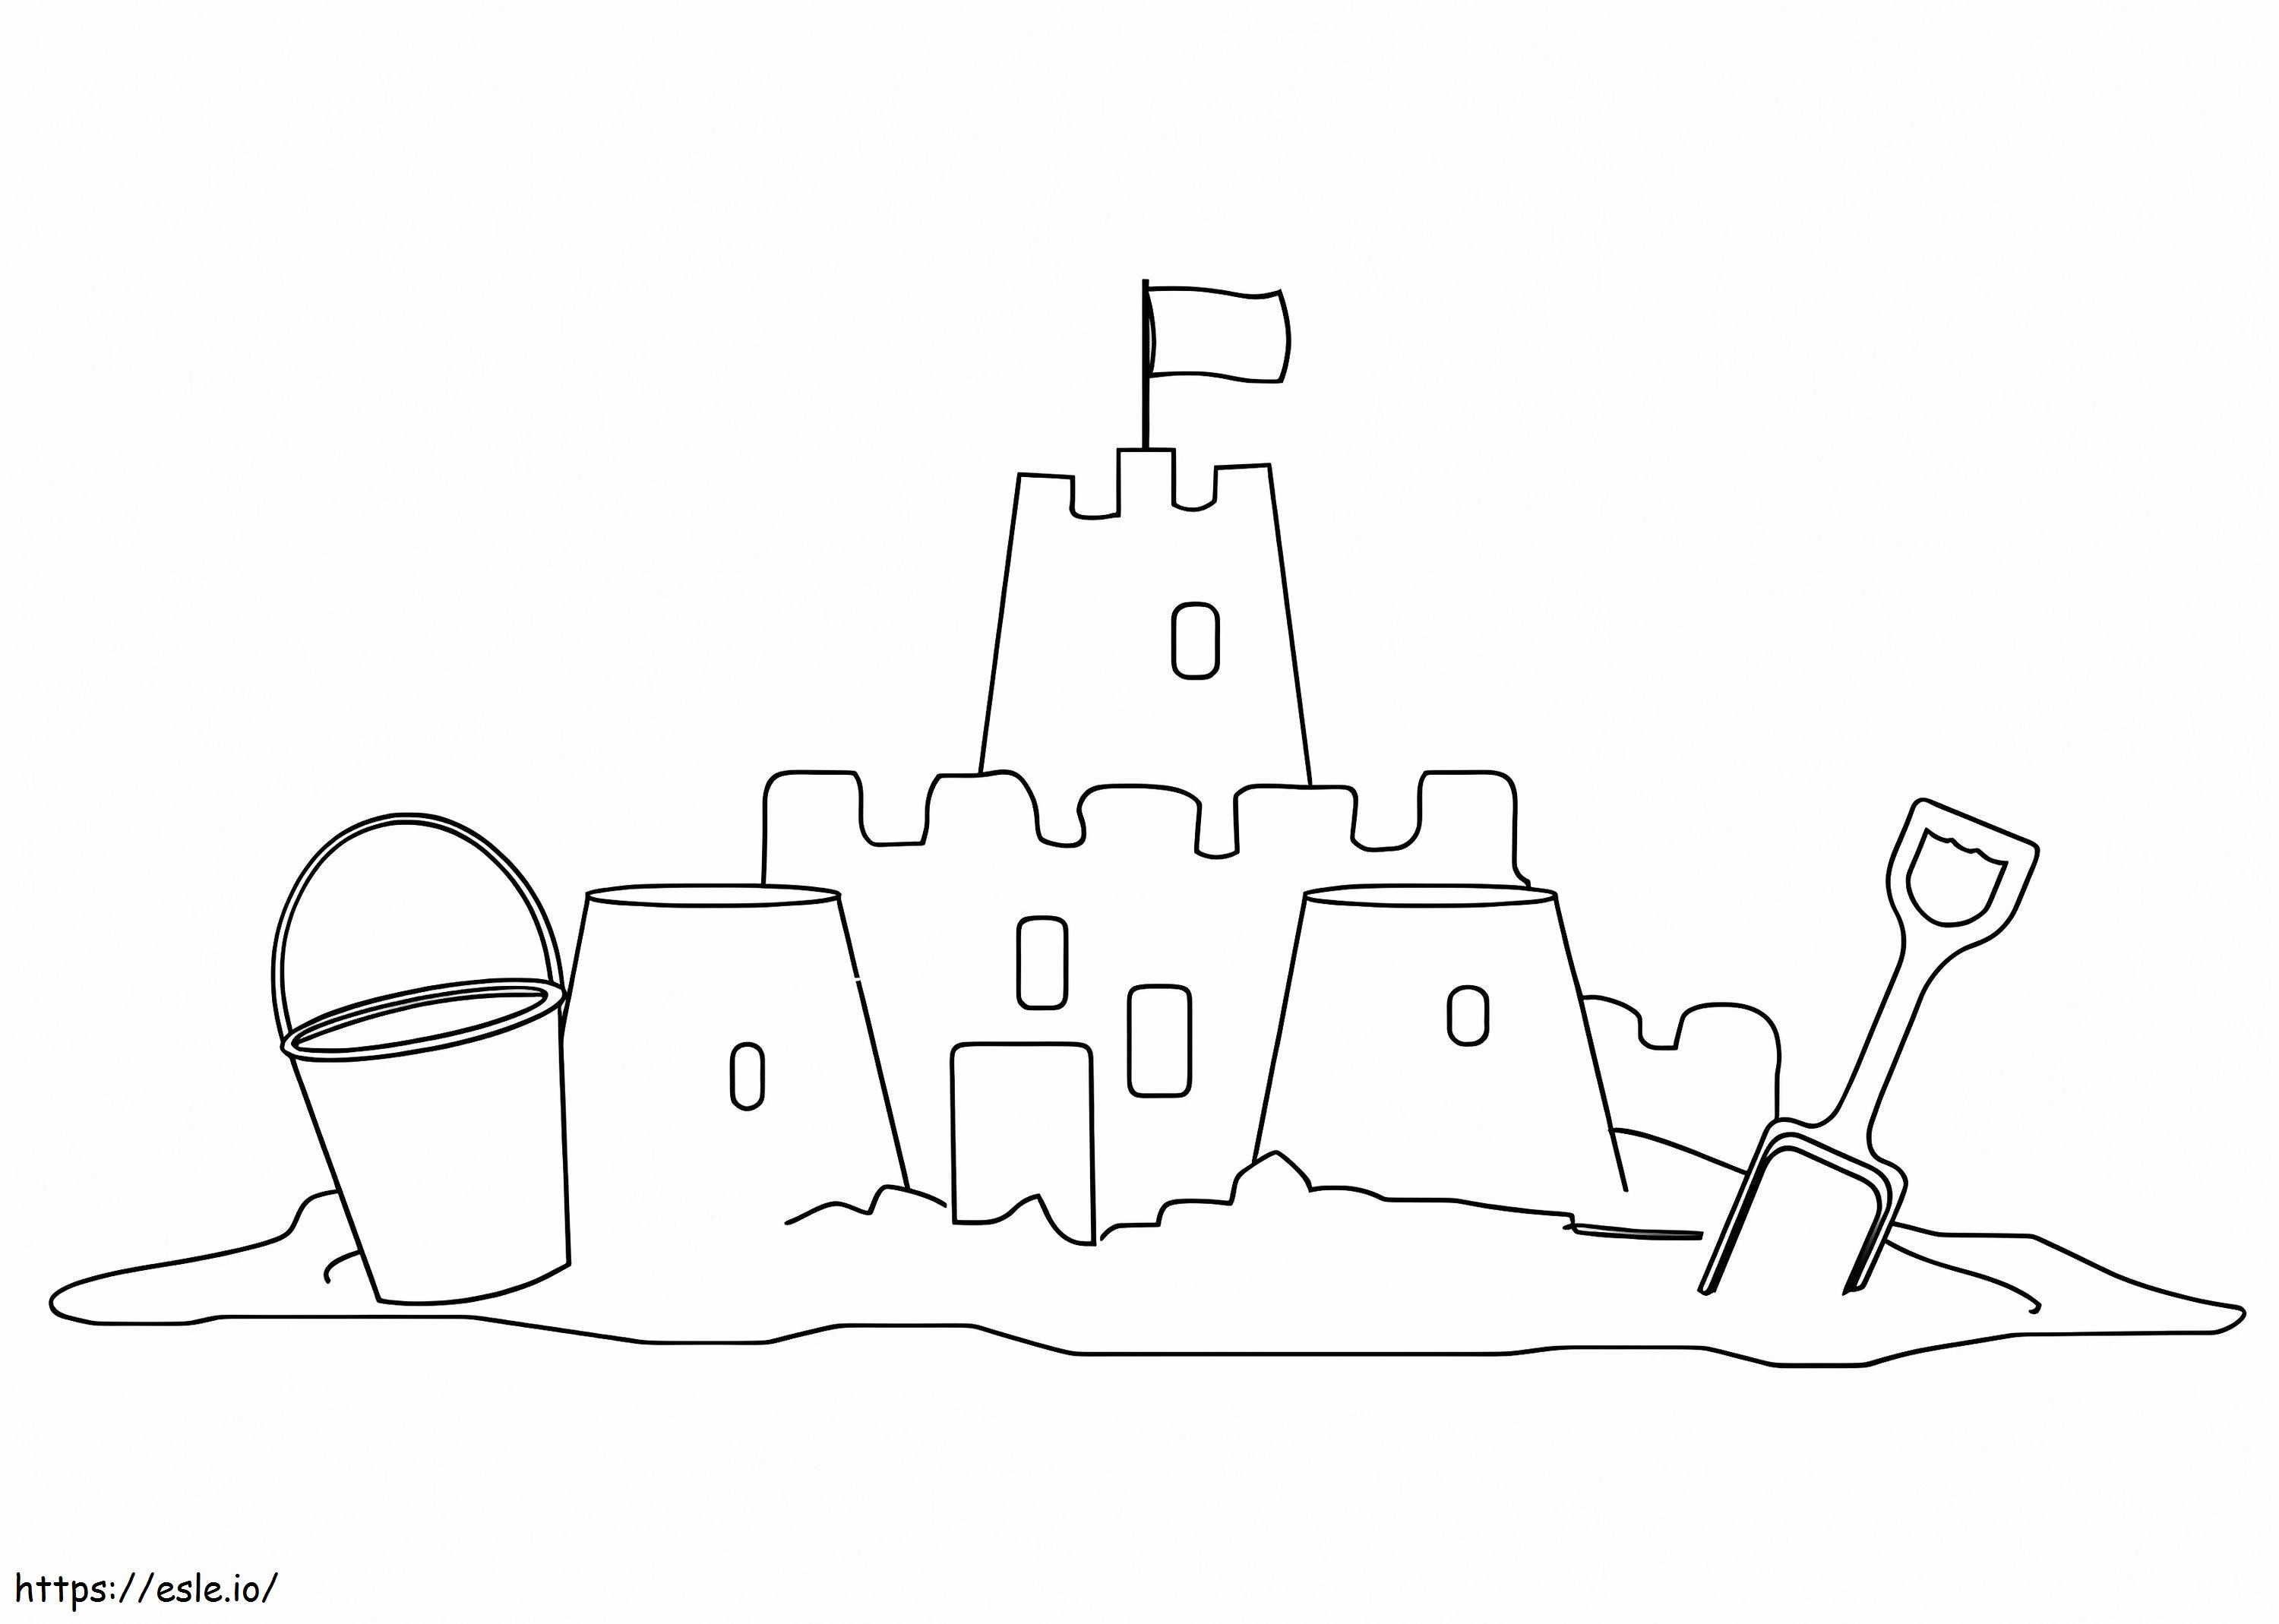 Sand Castle Printable coloring page